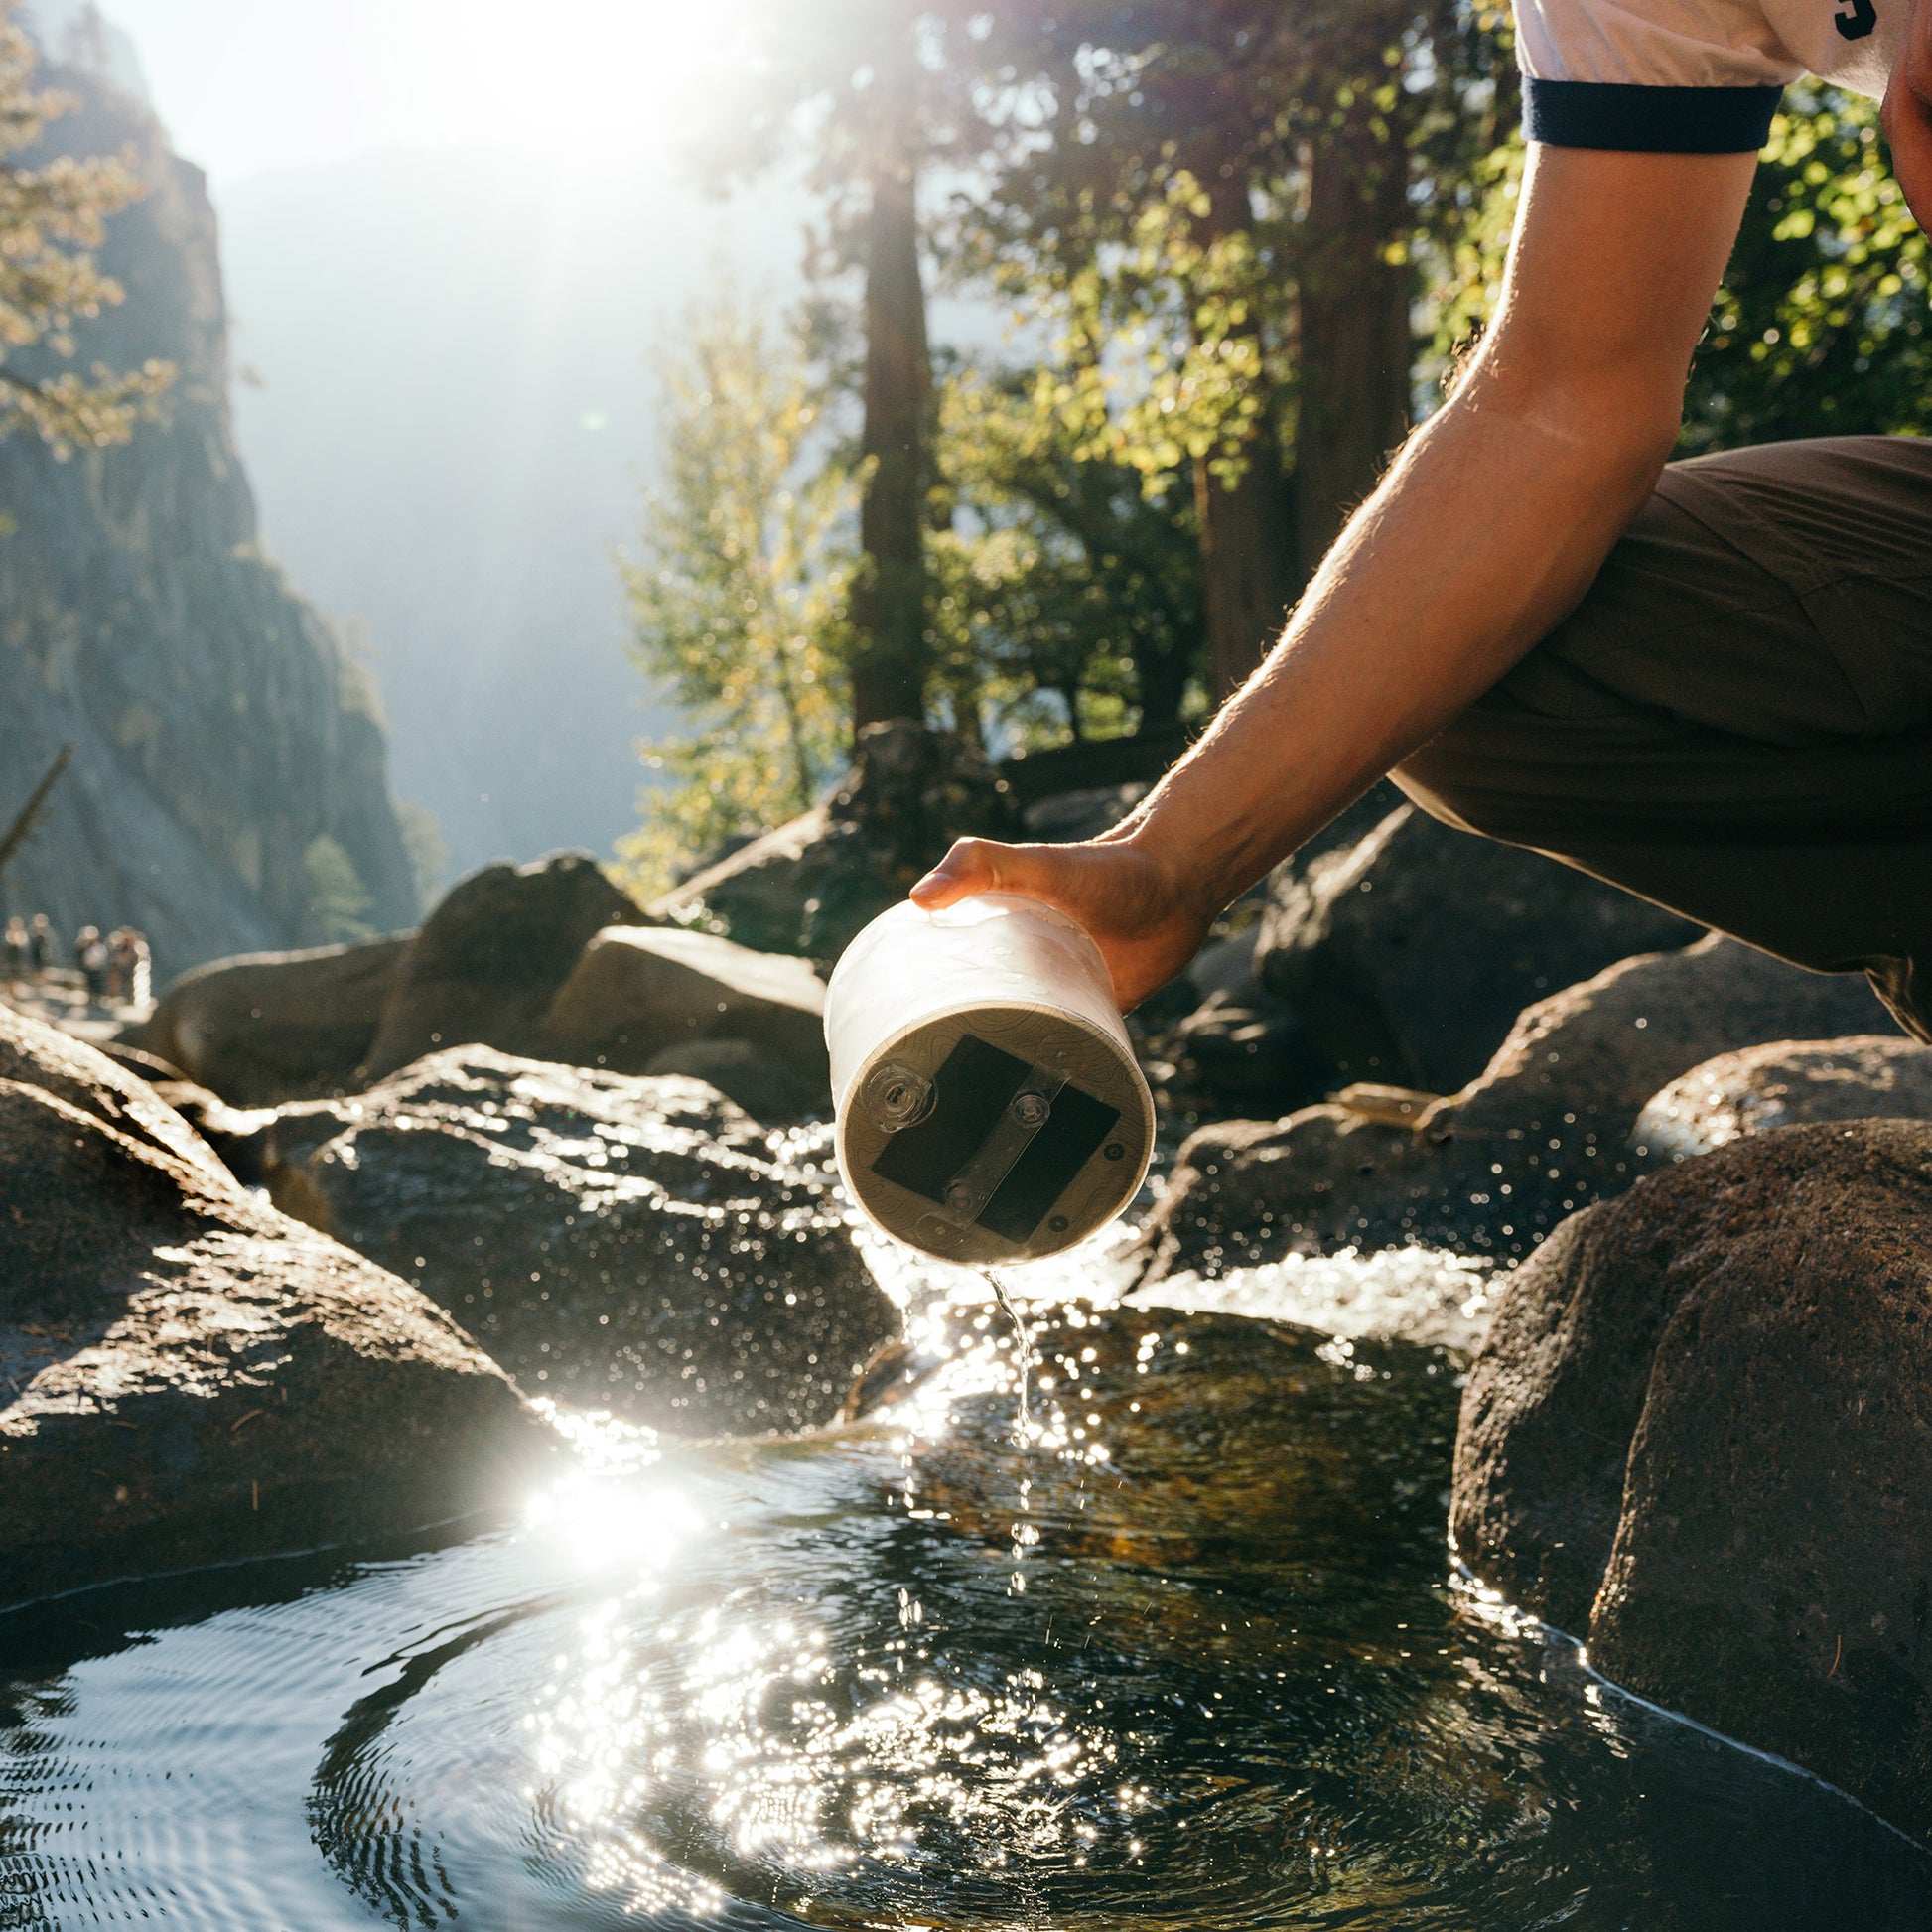 A man washes a rechargeable Luci solar light in a scenic stream, surrounded by misty mountains and lush forest.